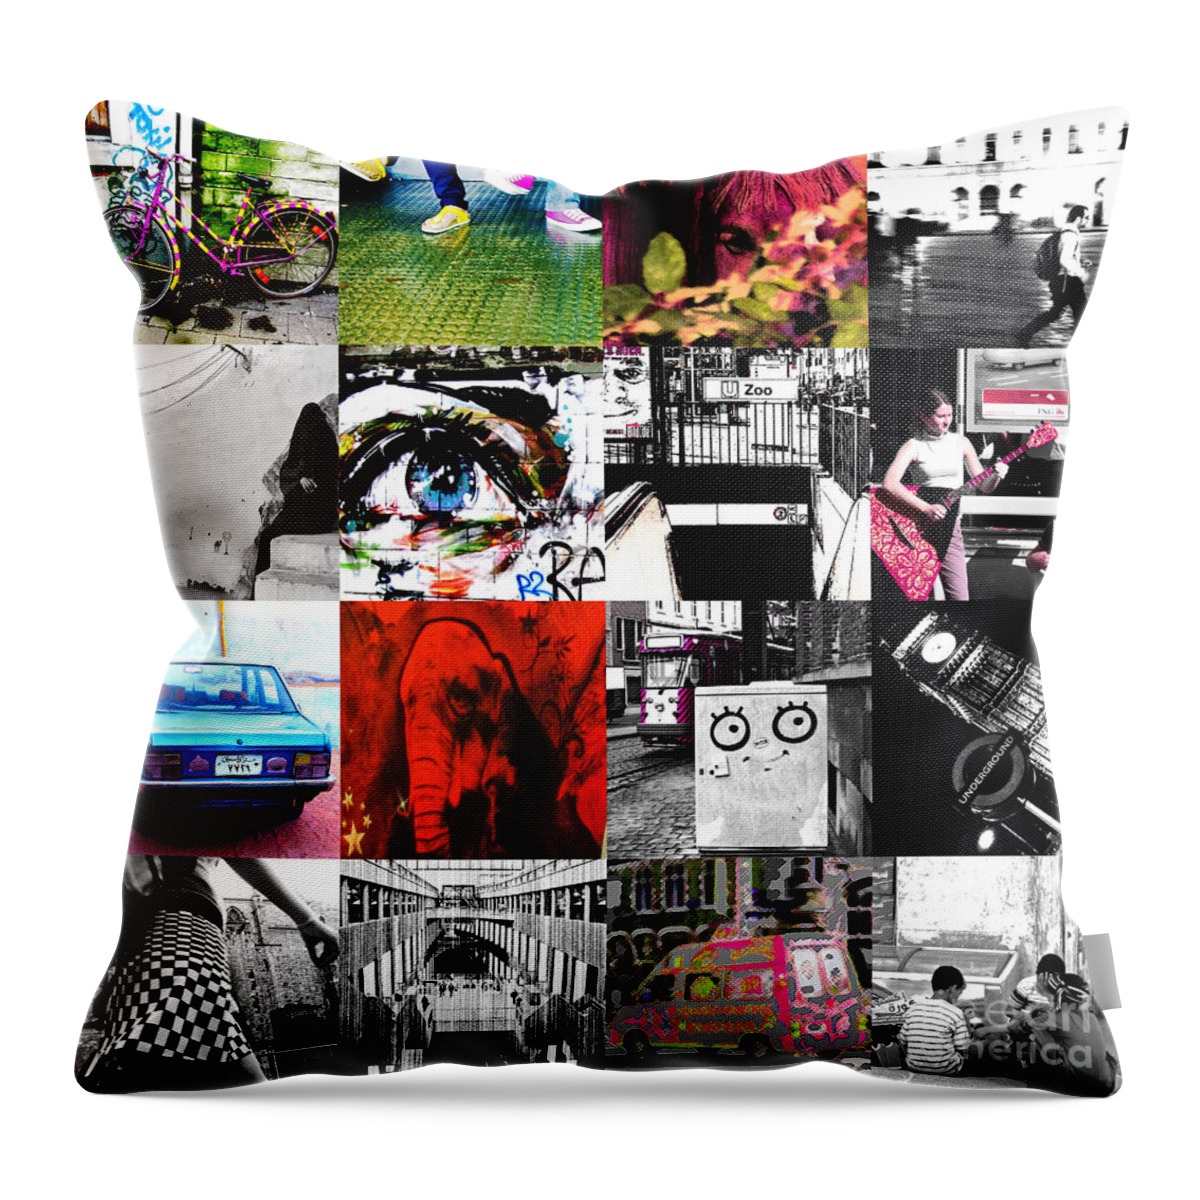 Collage Colage Collague Achtung Baby U2 Cover Portada Zoo Baby Album 16 4x4 Colours Europe World Elephant Car Arabian Train Station Throw Pillow featuring the photograph Zoobaby by Enrique Collado